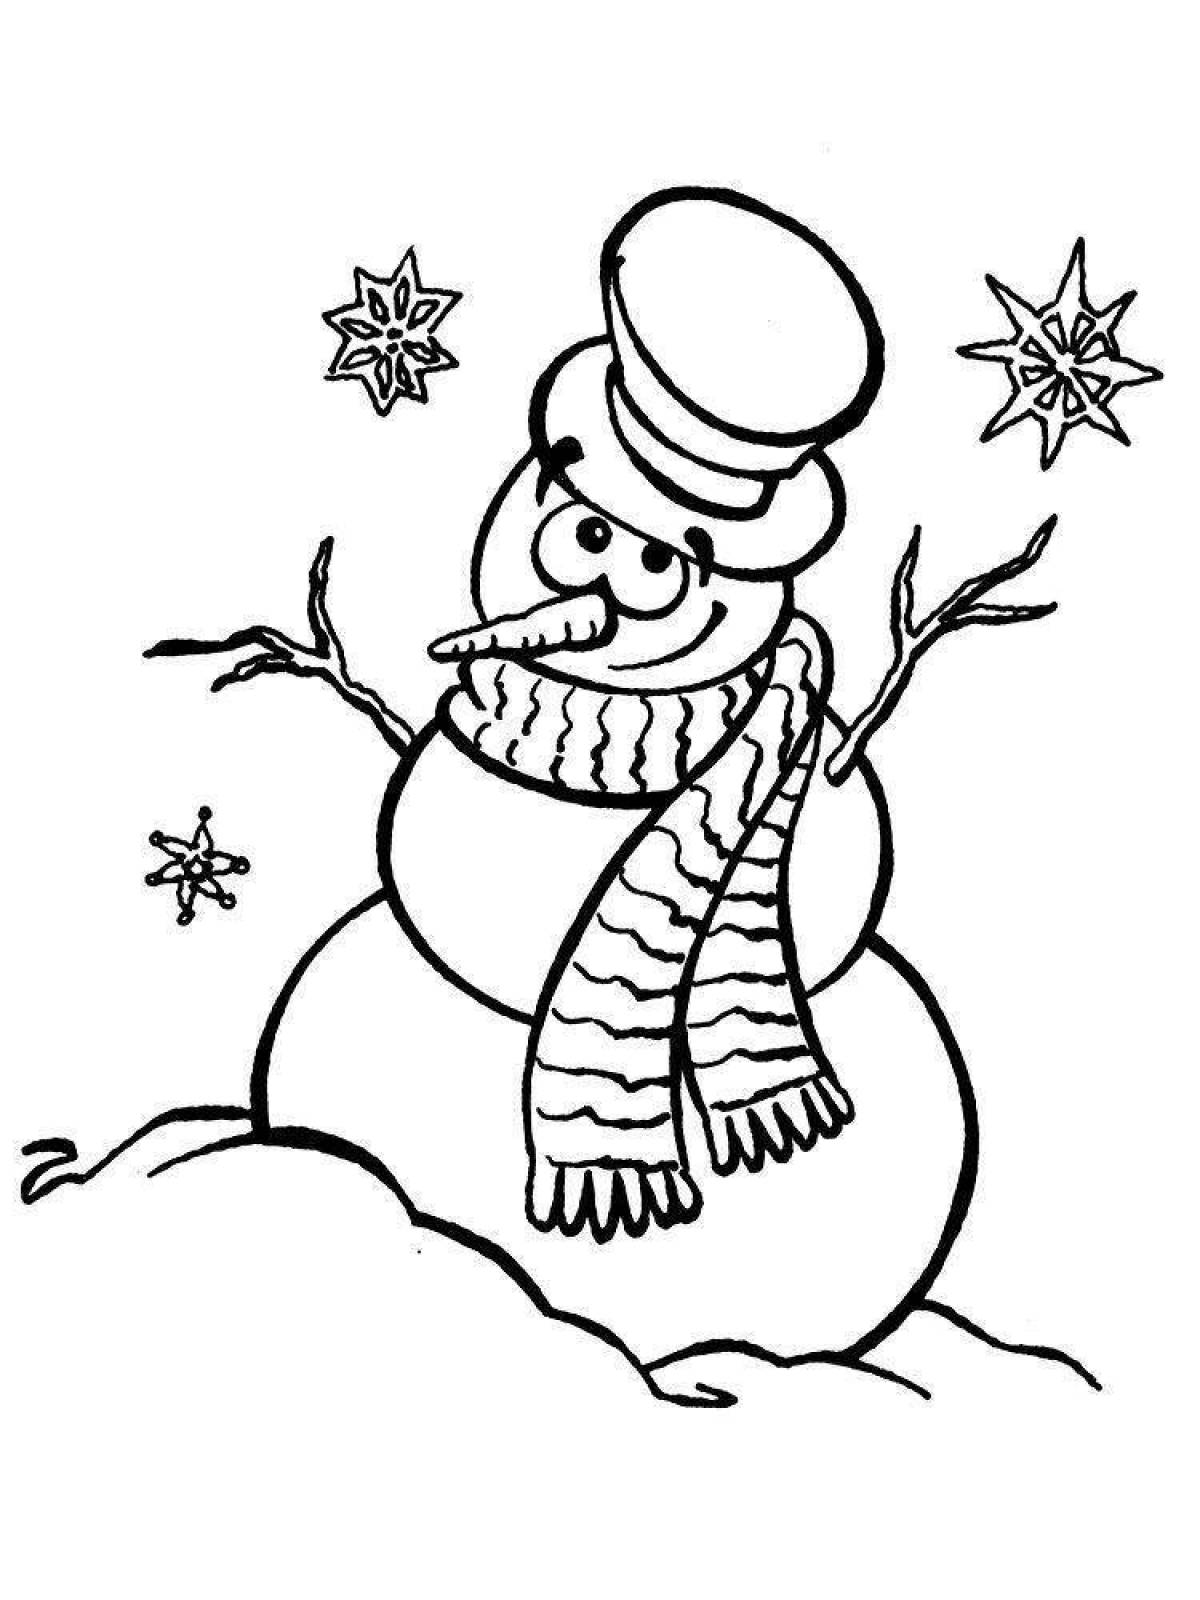 Happy new year shining coloring page